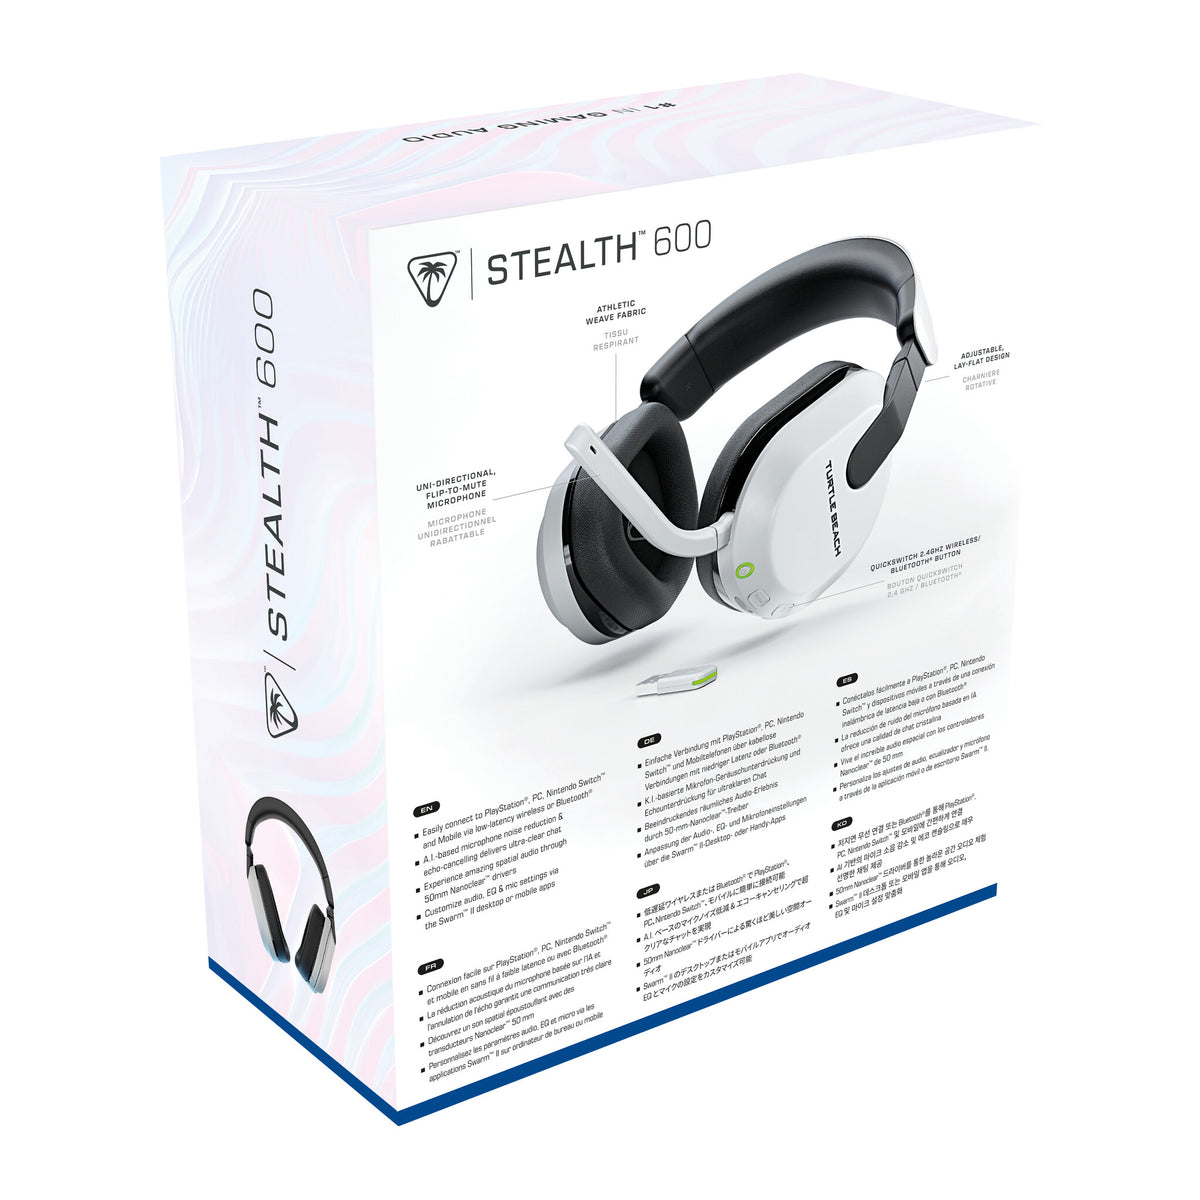 Turtle Beach Stealth 600 (3rd Gen) - Wireless Bluetooth Gaming Headset for PS4 / PS5 in White